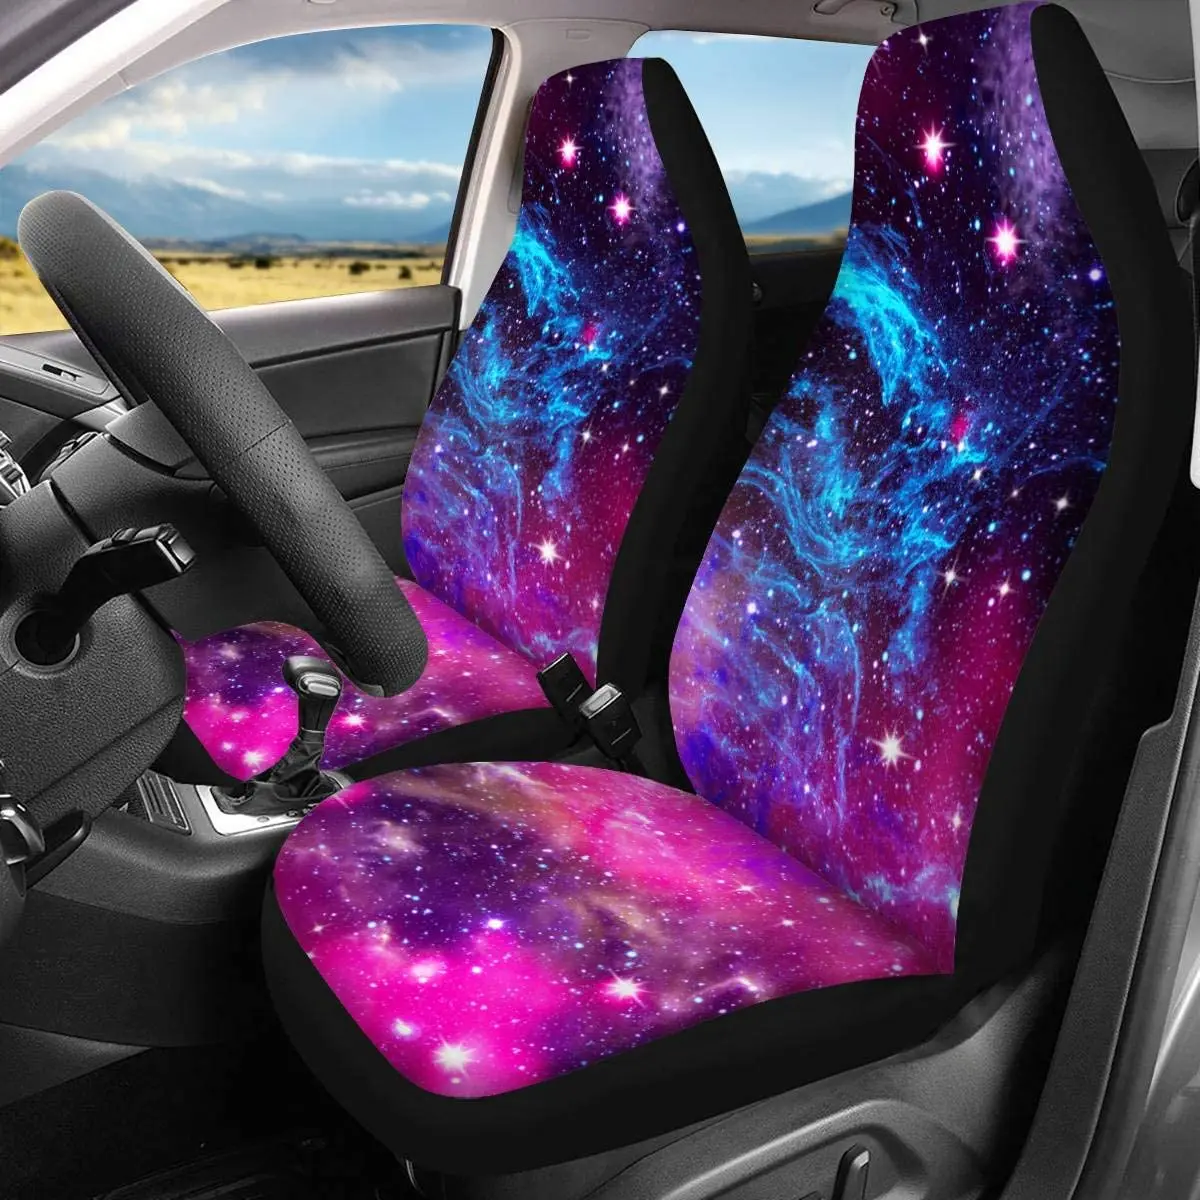 

2 Piece Galaxy Car Seat Covers Front Seats Only Bucket Vehicle Seat Universal Purple Seat Covers for Cars SUV Sedan Van Trucks